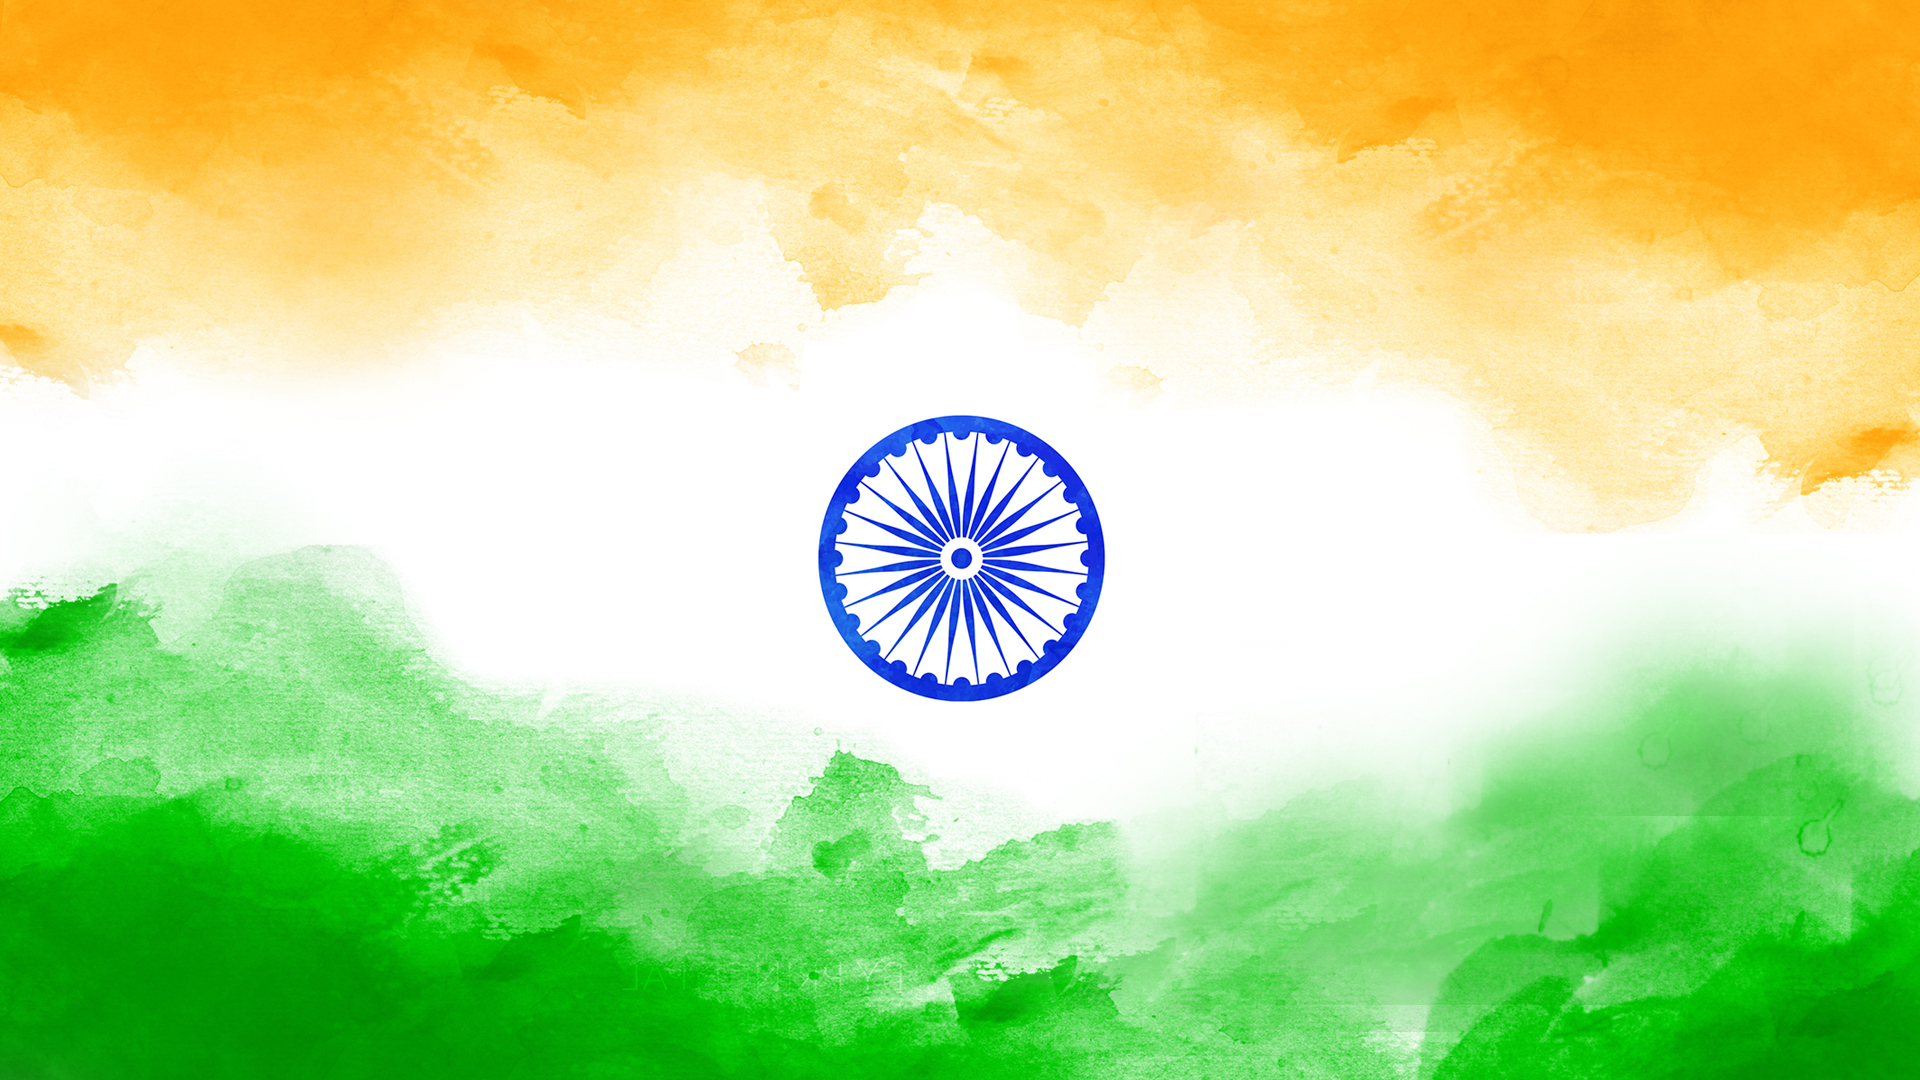 India Flag India Independence Day - 1920x1080 Wallpaper 